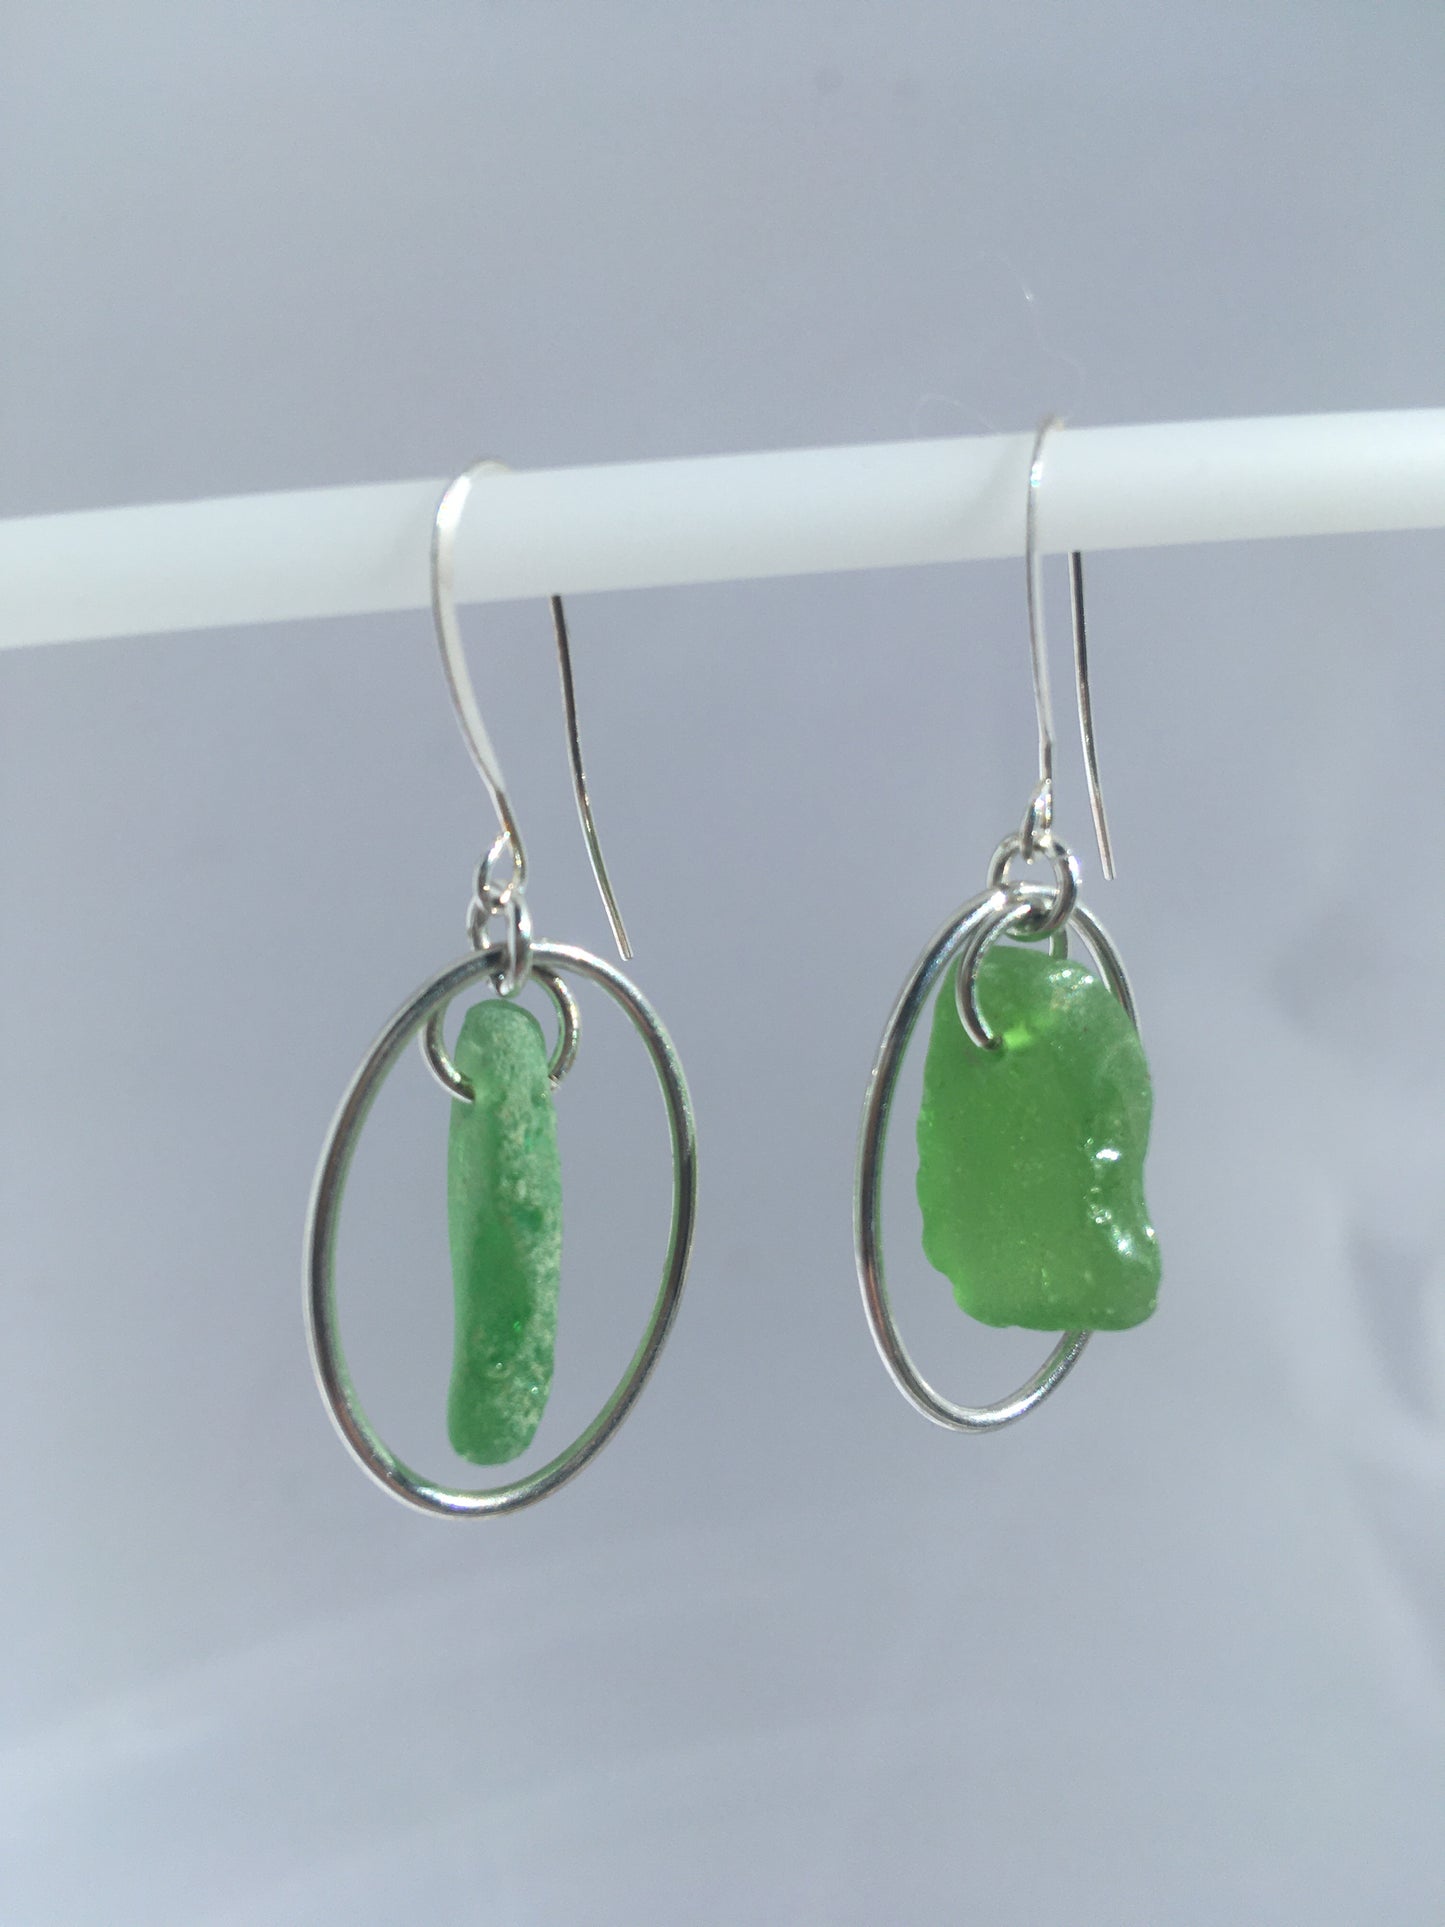 Heaven on Earth Earrings - Green sea glass from Sidney, British Columbia with Sterling Silver Ovals on a nickle-free hook